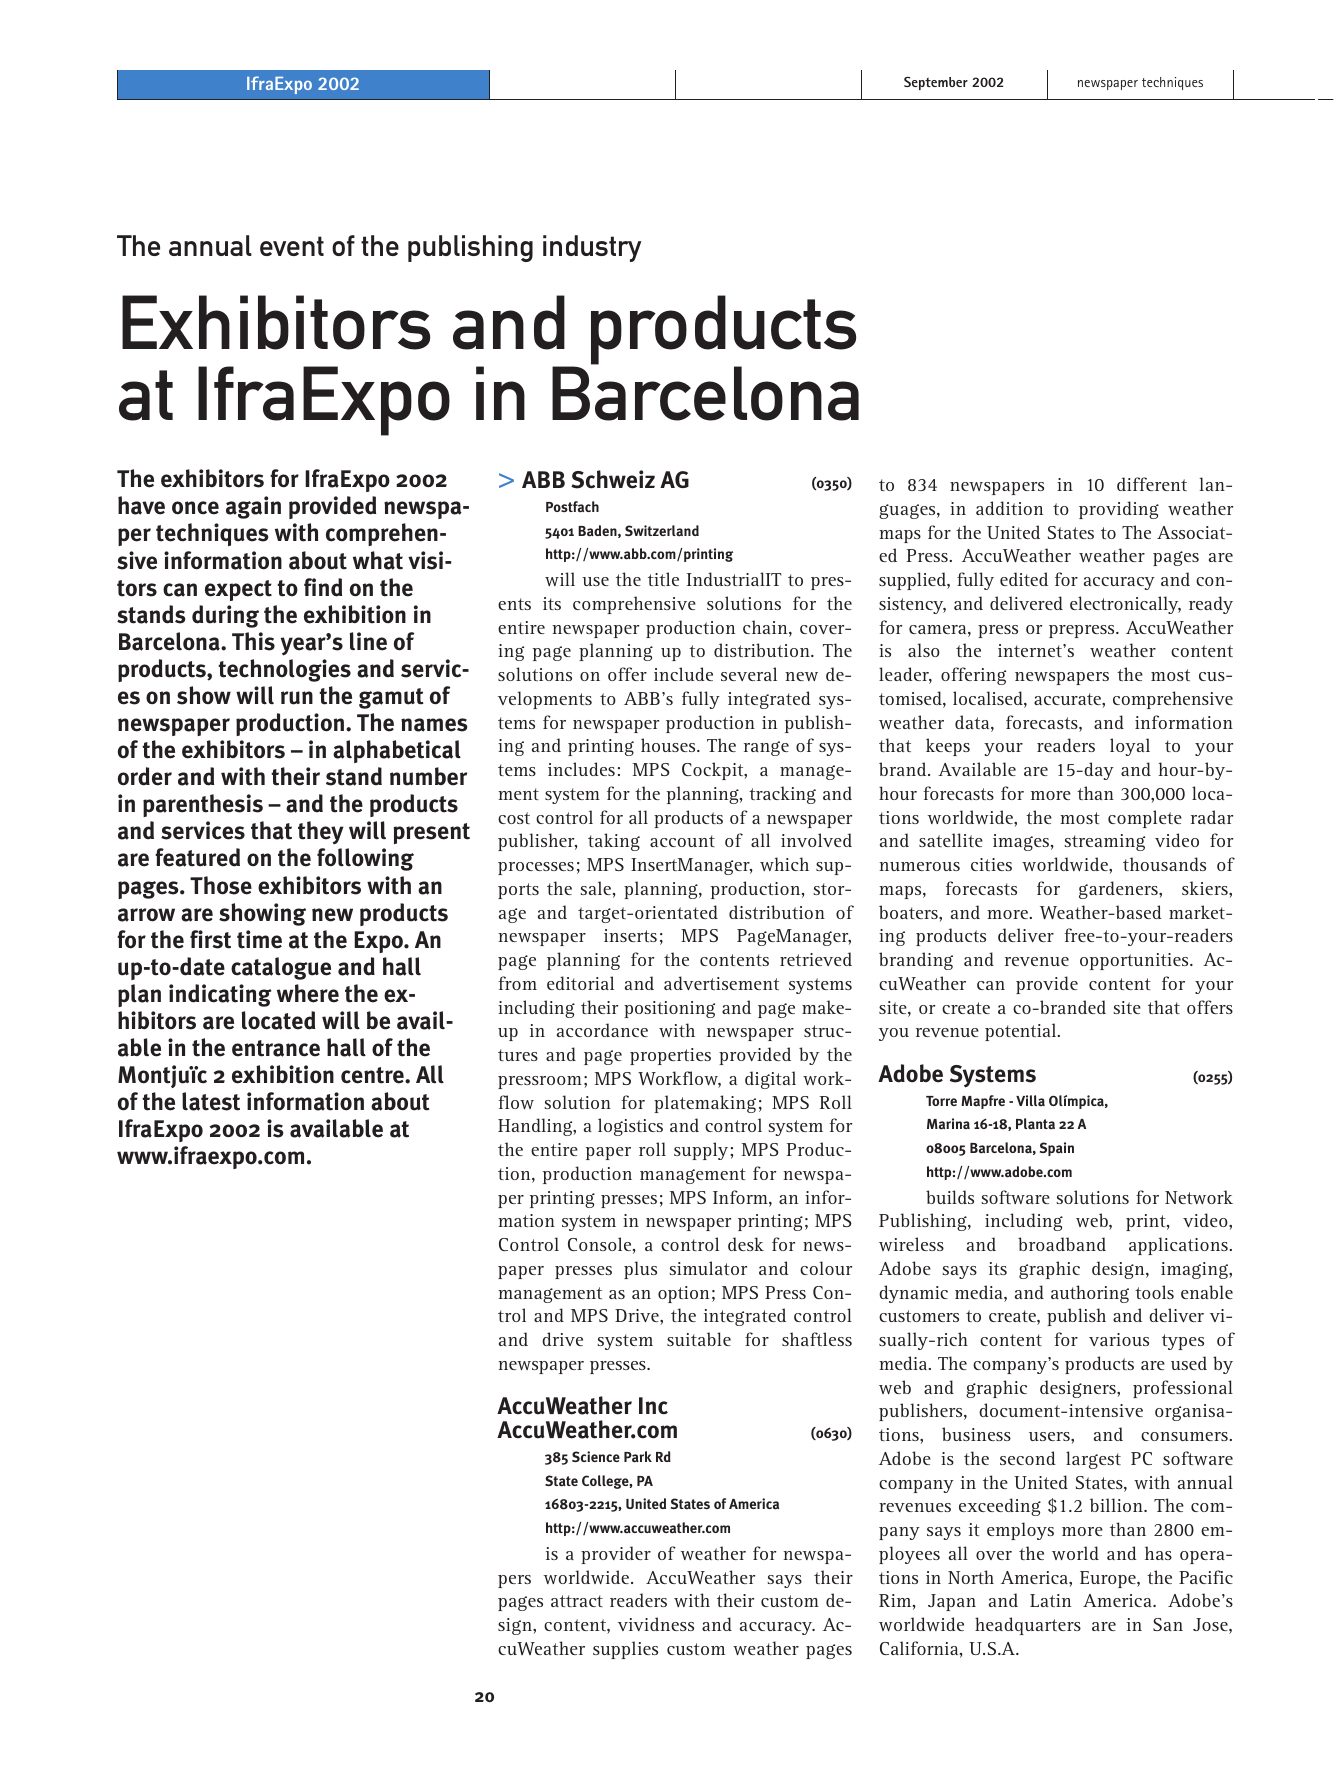 Exhibitors And Products At Ifraexpo In Barcelona Wan Ifra Manualzz